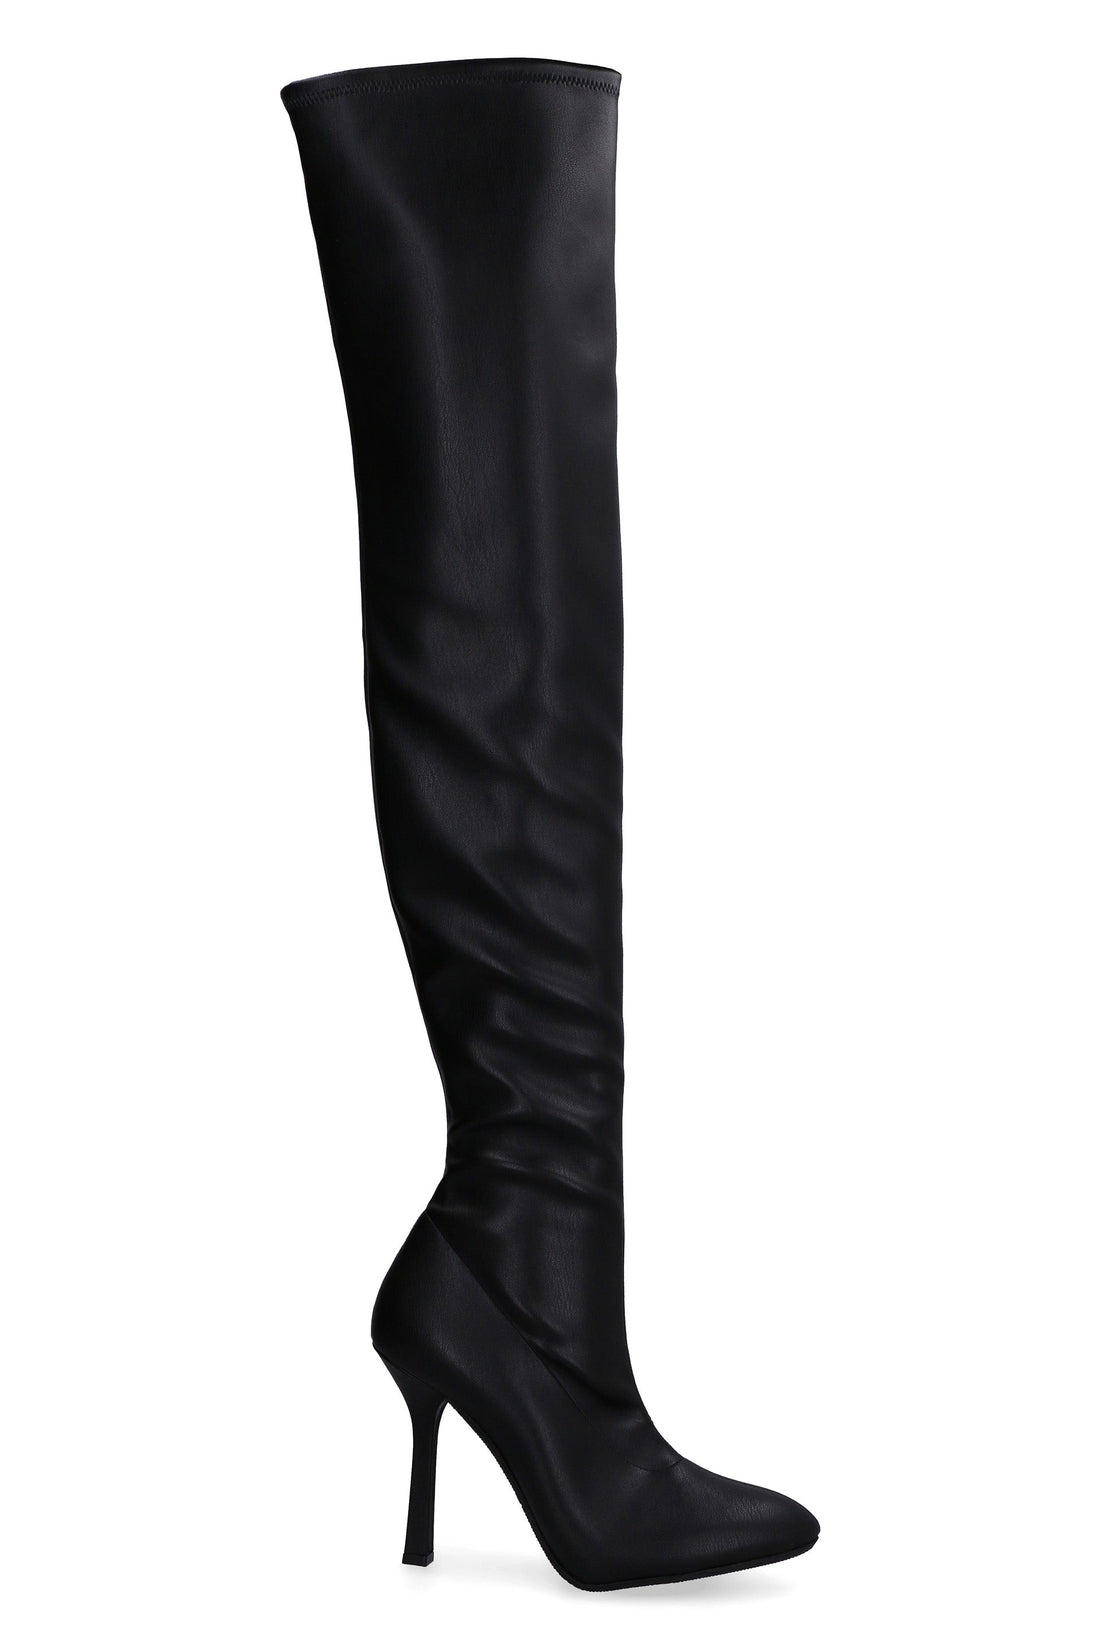 Casadei-OUTLET-SALE-Over-the-knee boot-ARCHIVIST